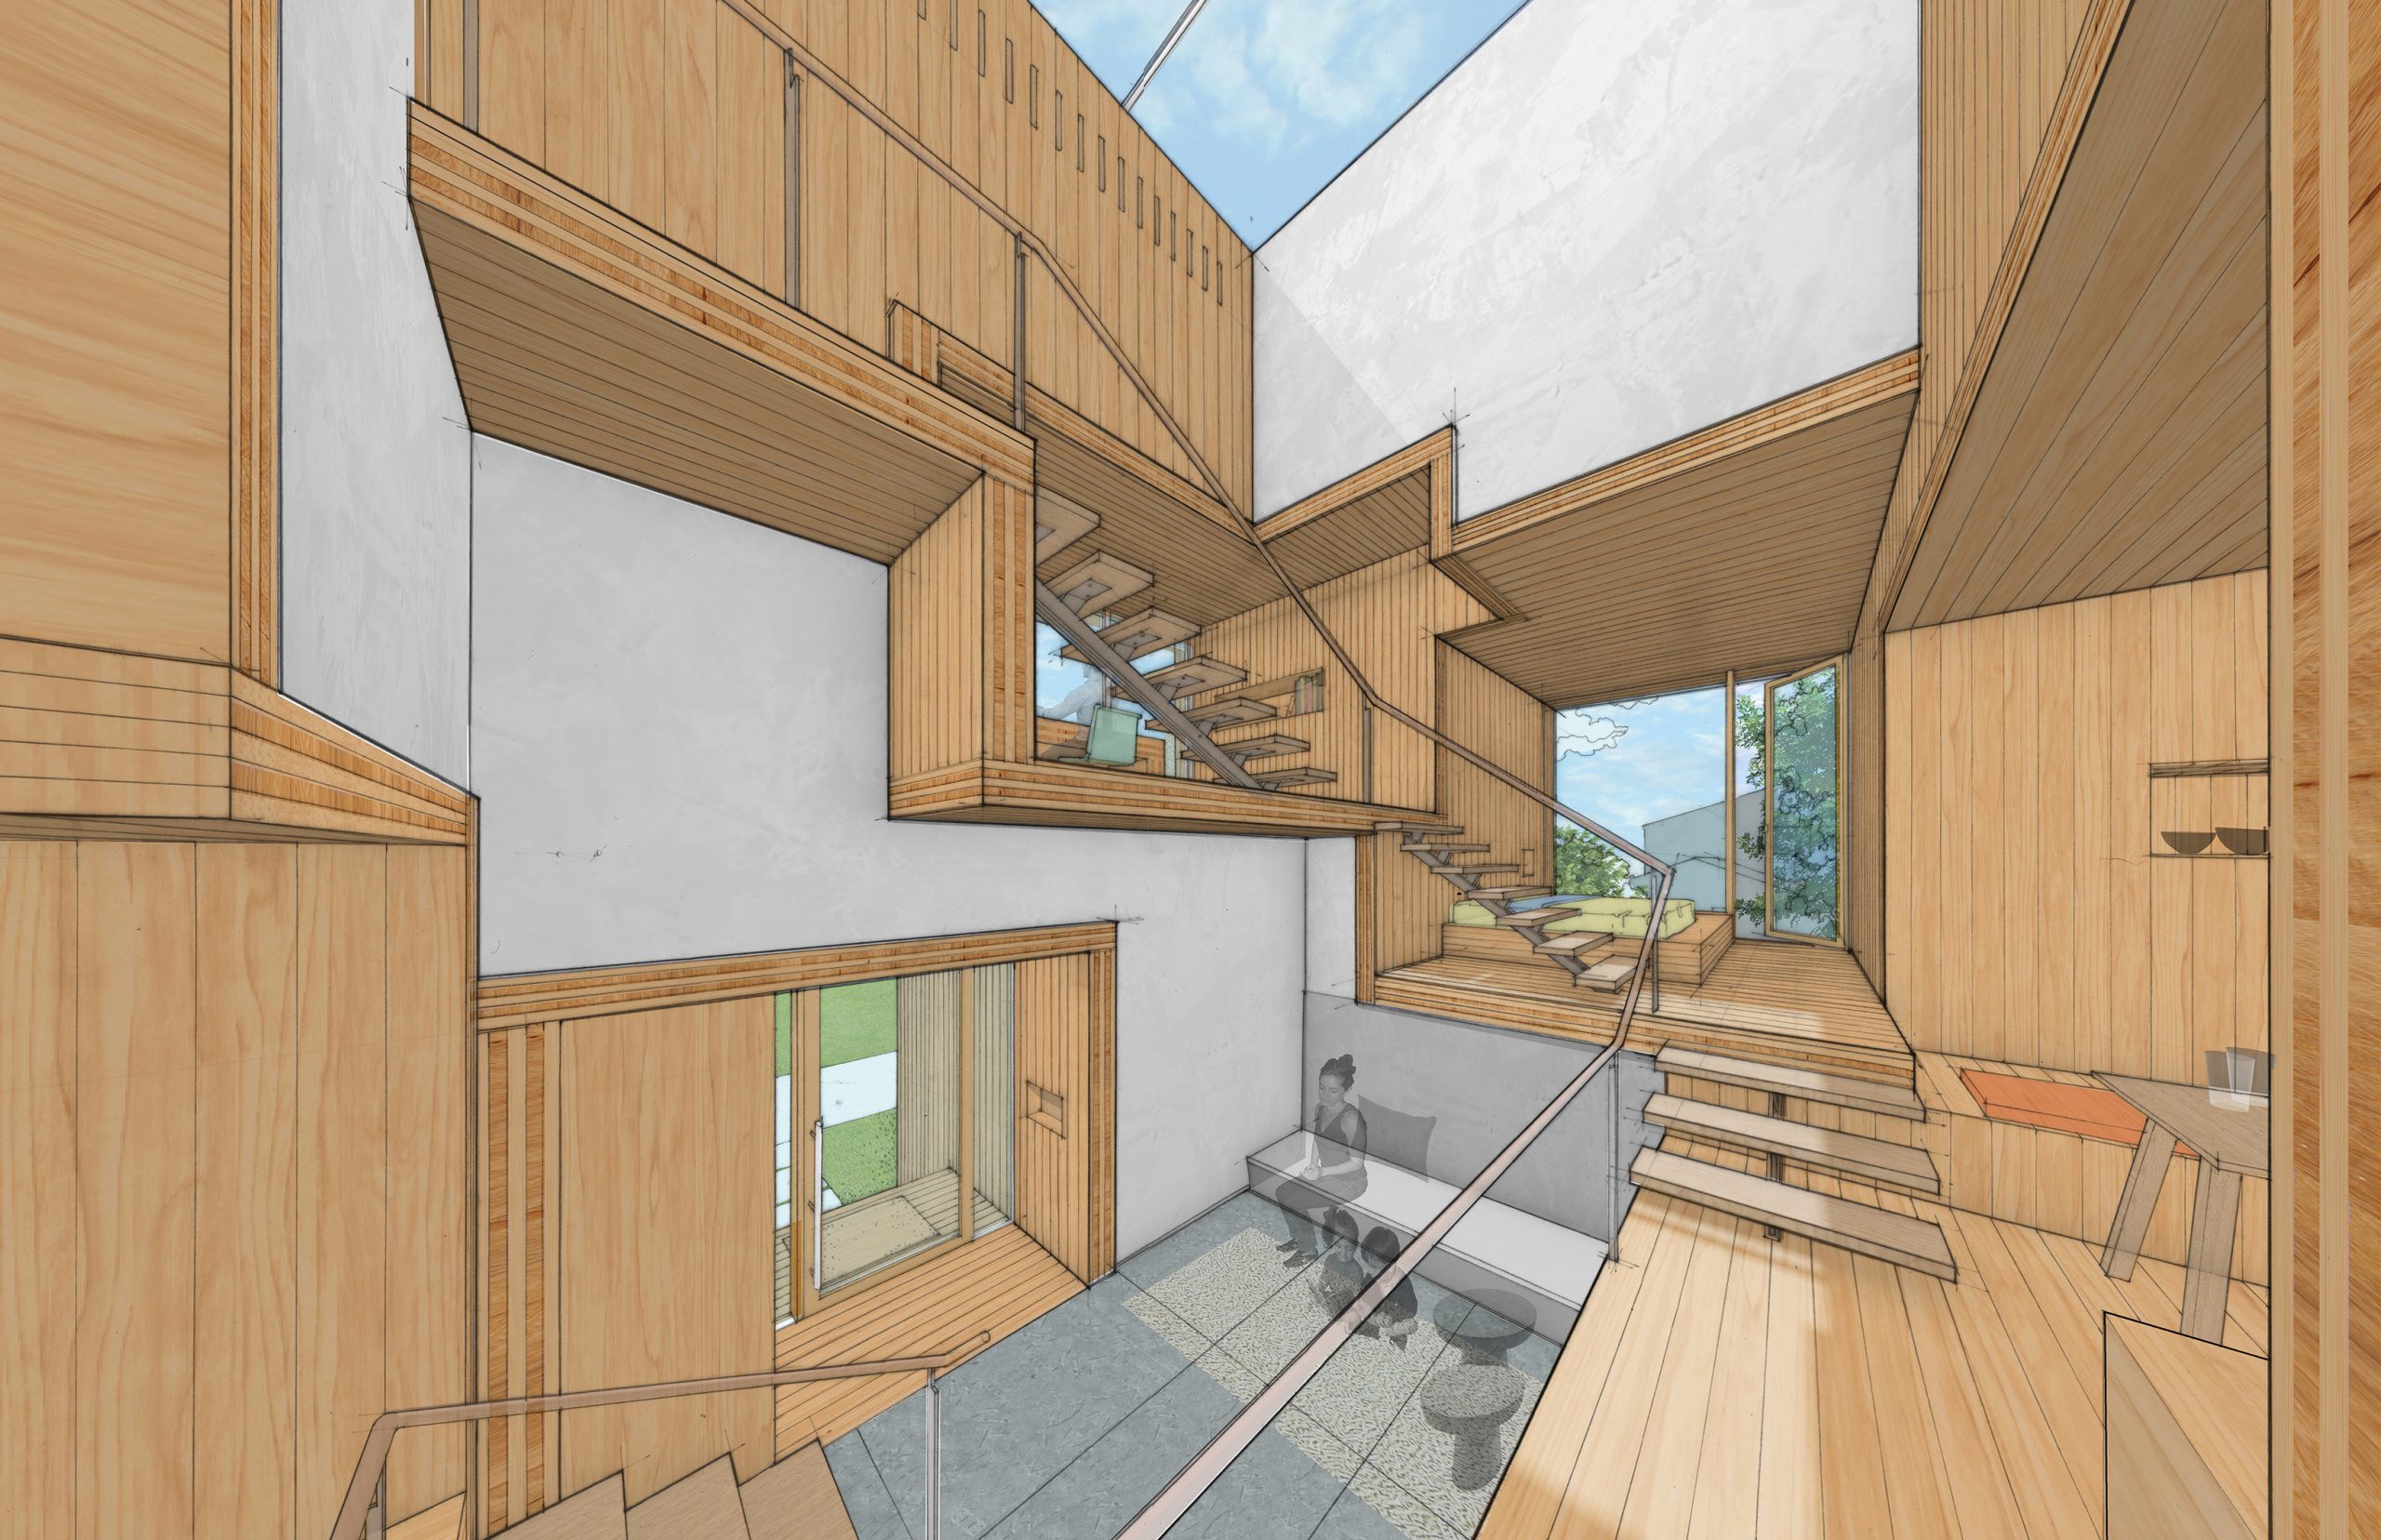 Interior digital drawing of the inside of a house